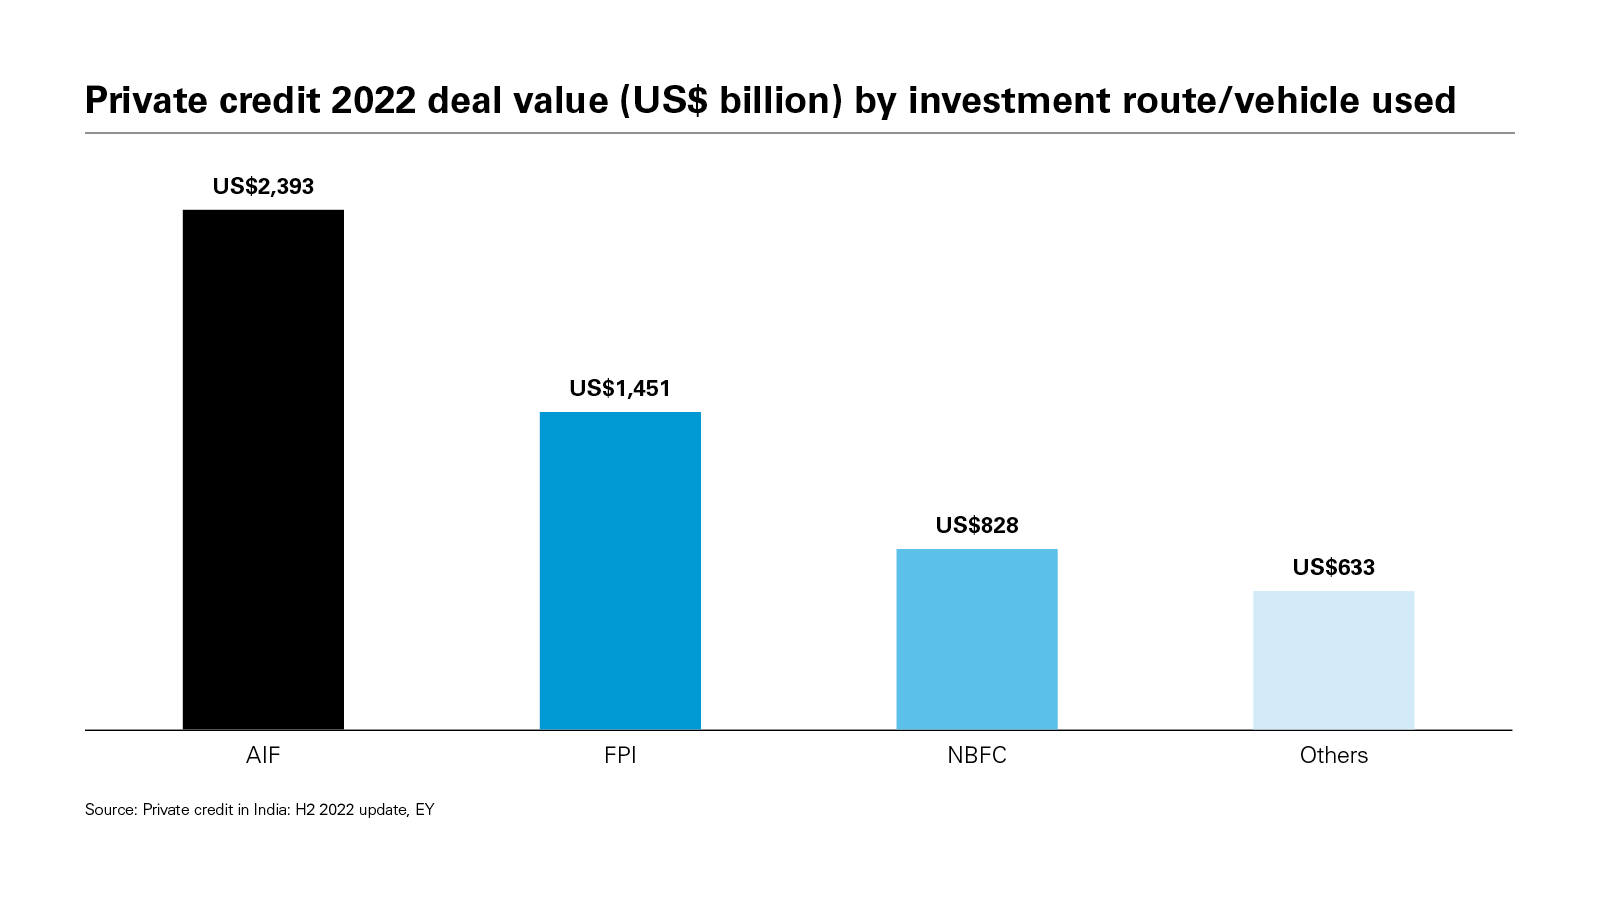 Private credit 2022 deal value (US$ billion) by investment route/vehicle used